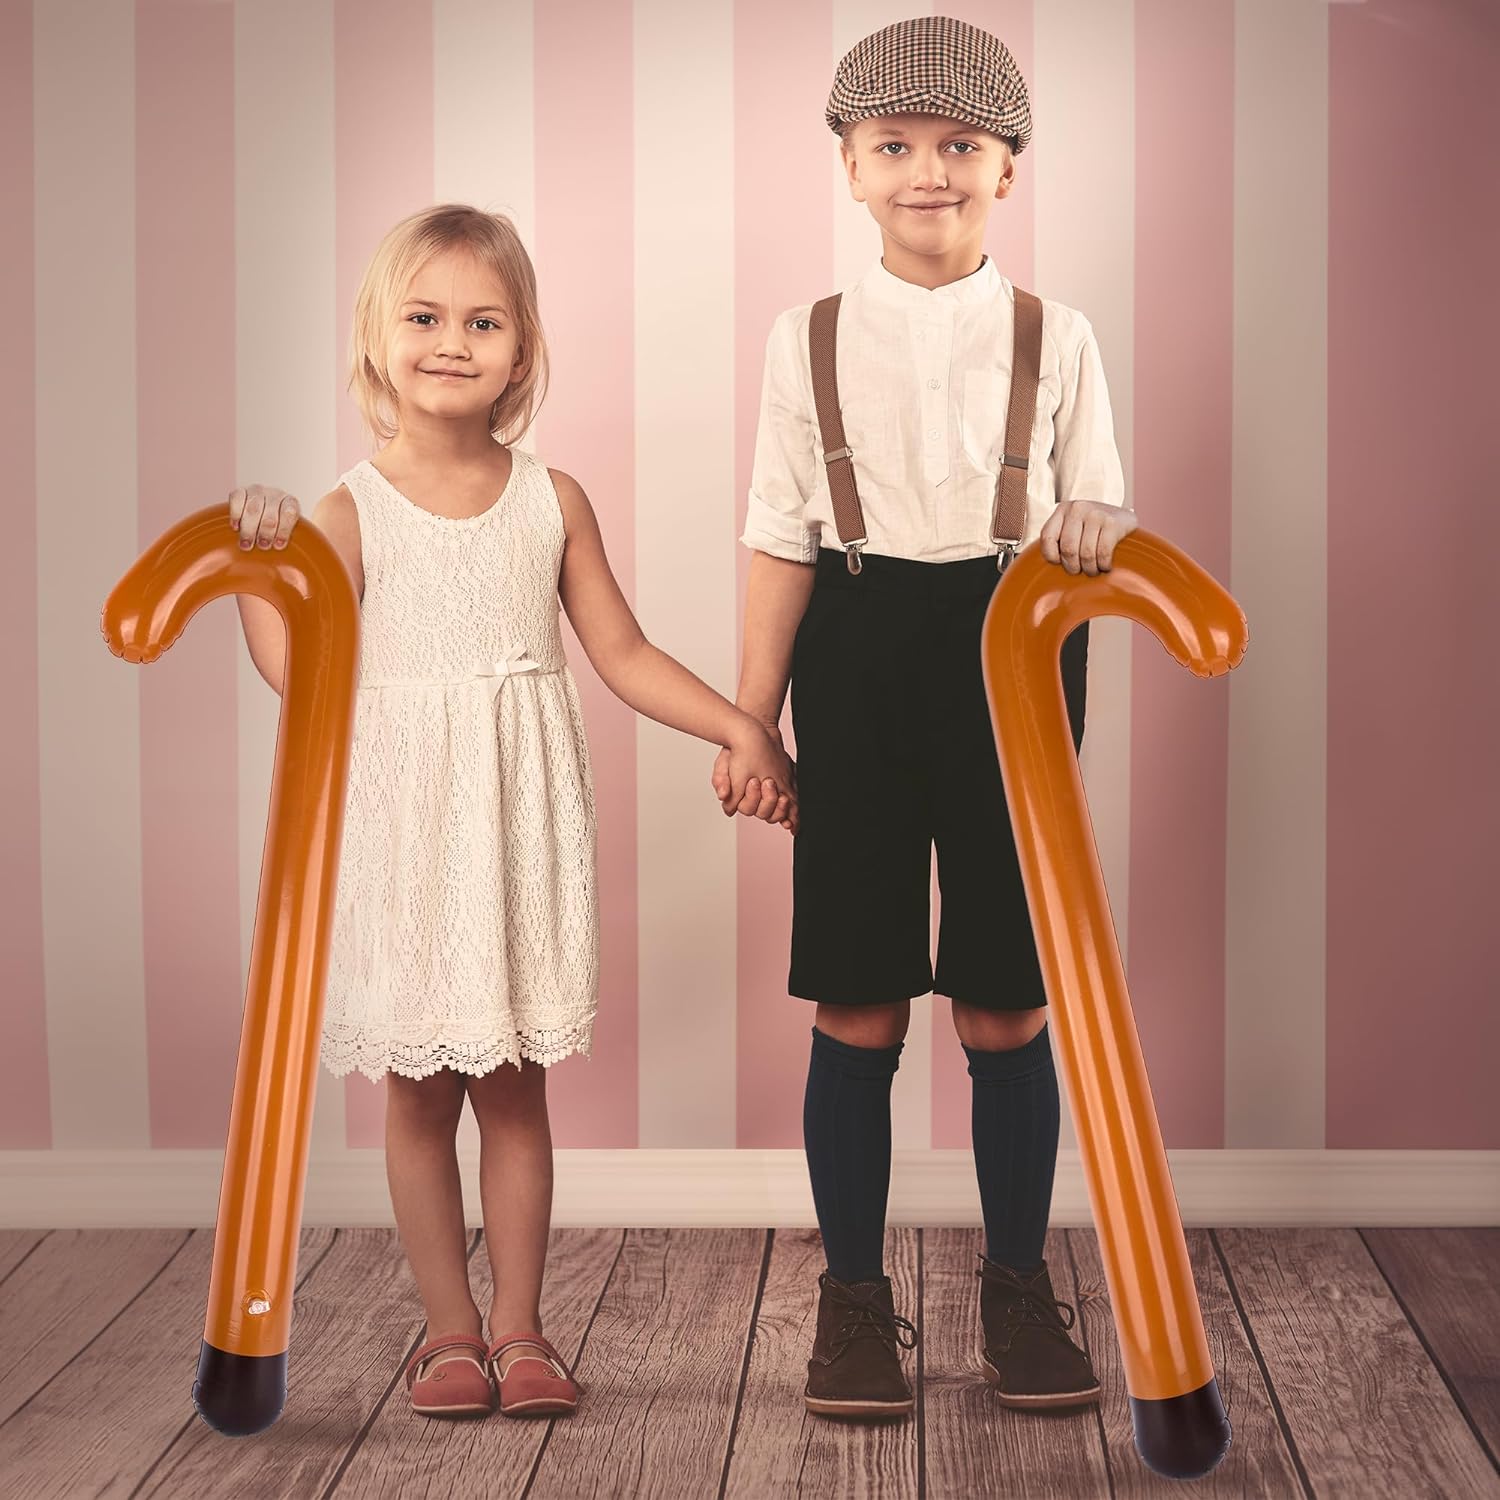 ArtCreativity Large Inflatable Cane Prop - Set of 2, 35 Inches, Brown & Black Inflatable Kids Toy Canes, Over The Hill Party Decorations and Supplies, 100 Days of School Costume Props